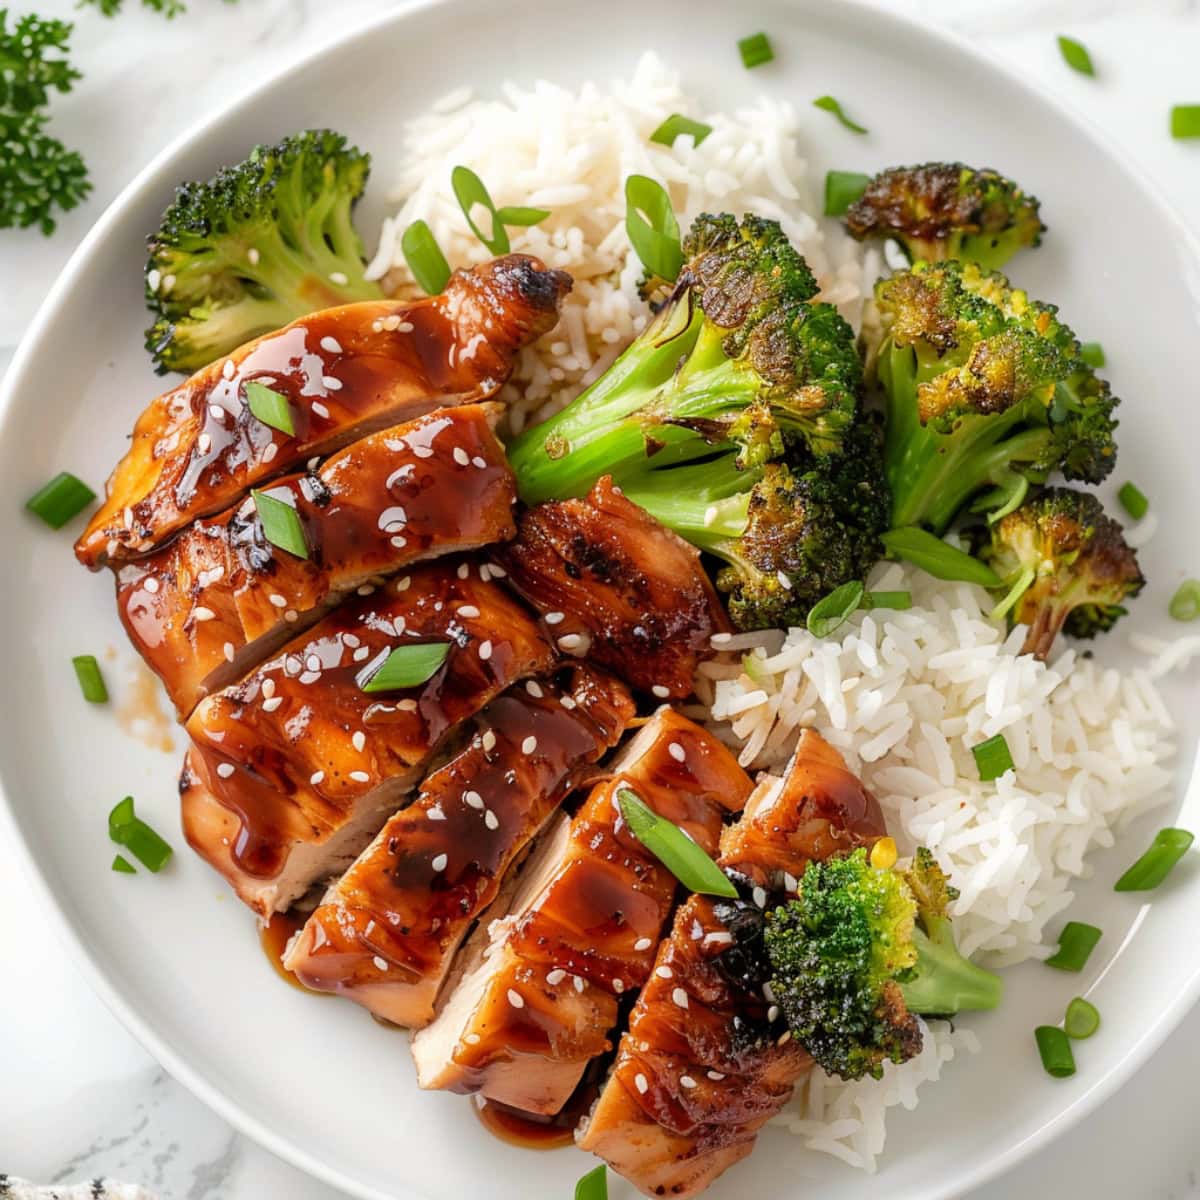 Sliced teriyaki chicken served with rice and broccoli in white plate.